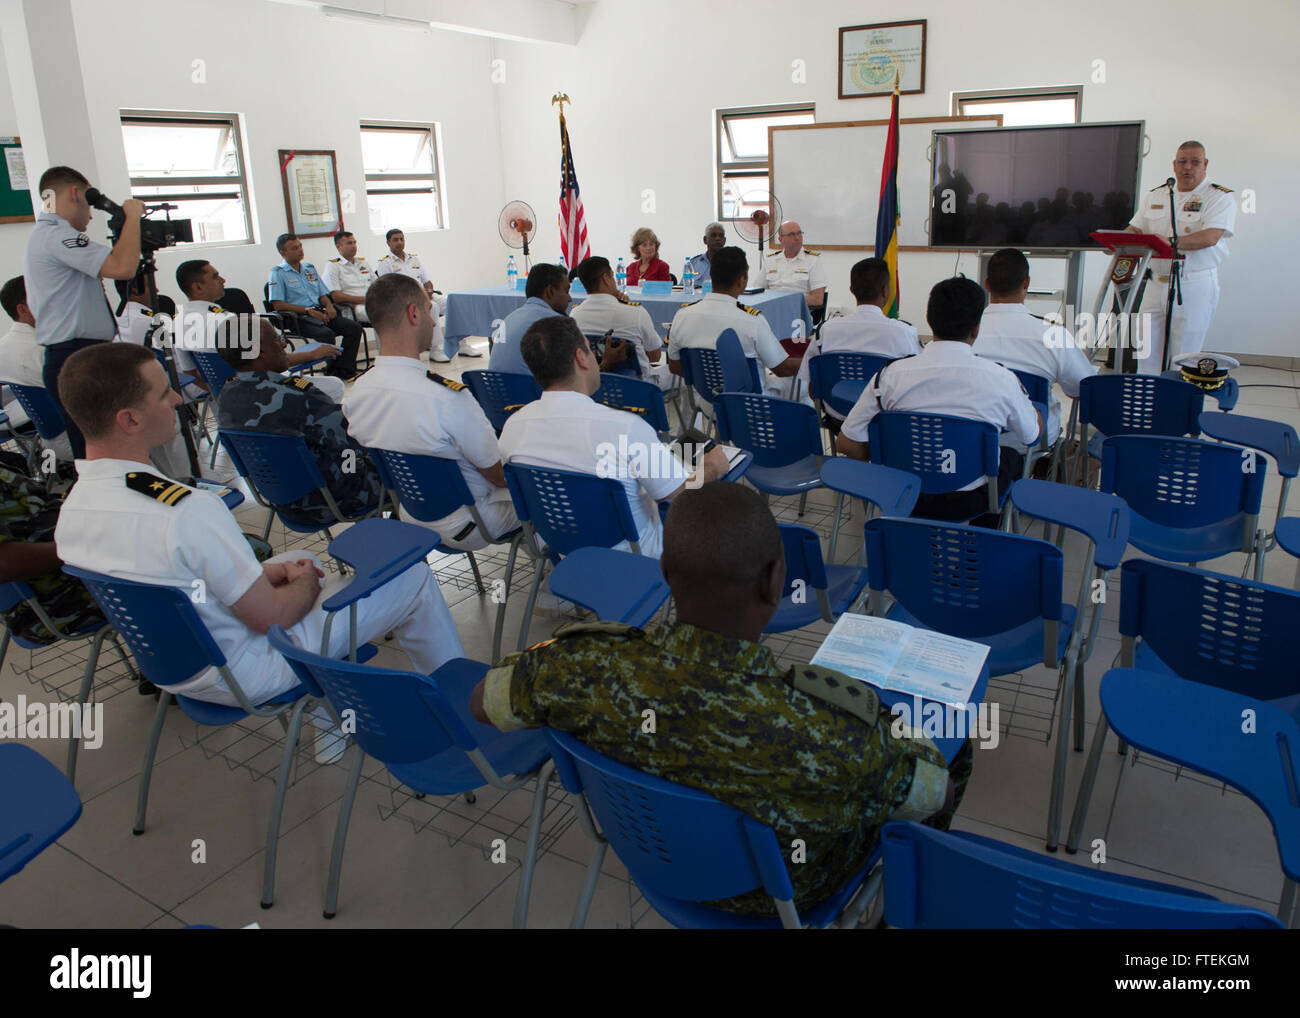 150128-N-QY759-049 LE CHALAND, Mauritius (Jan. 28, 2015) Capt. Rich Dromerhauser, deputy commodore CTF-65, addresses attendees during the opening ceremony of Exercise Cutlass Express 2015, Jan. 28. Exercise Cutlass Express 2015, sponsored by U.S. Africa Command, is designed to improve regional cooperation, maritime domain awareness, and information sharing practices to increase capabilities of East African and Indian Ocean nations to counter sea-based illicit activity. (U.S. Navy photo by Mass Communication Specialist 1st Class David R. Krigbaum/Released) Stock Photo